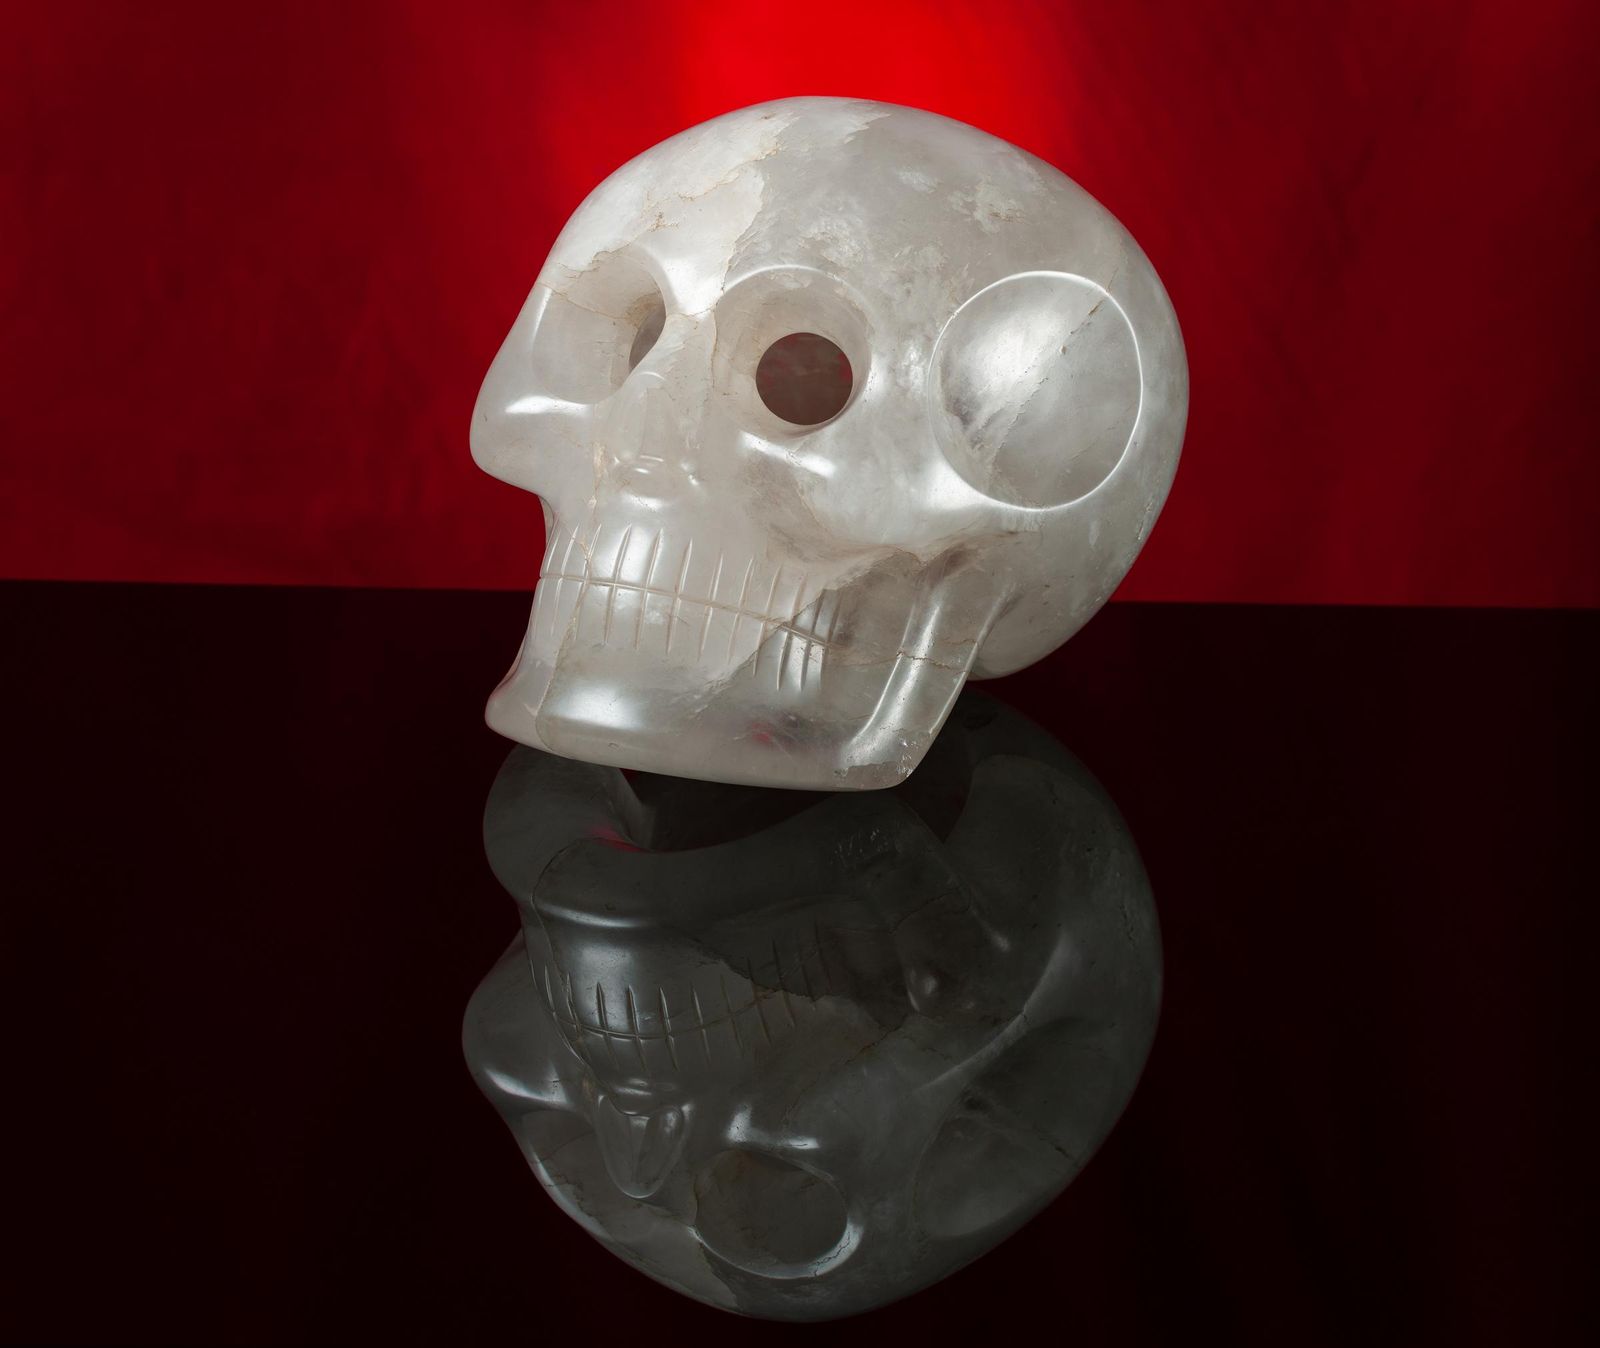 The Mitchell-Hedges crystal skull is kept in Indiana